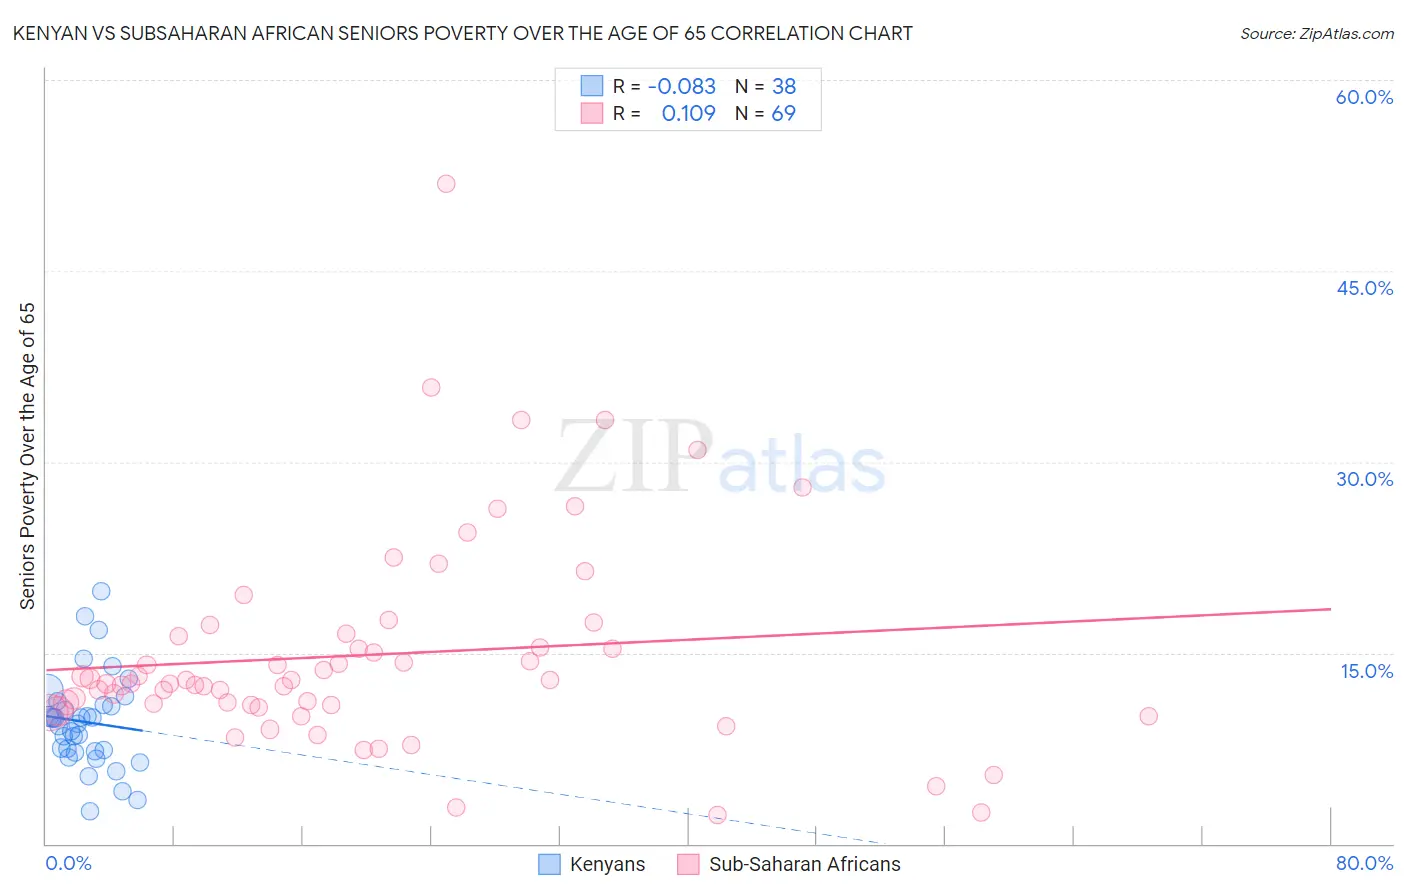 Kenyan vs Subsaharan African Seniors Poverty Over the Age of 65